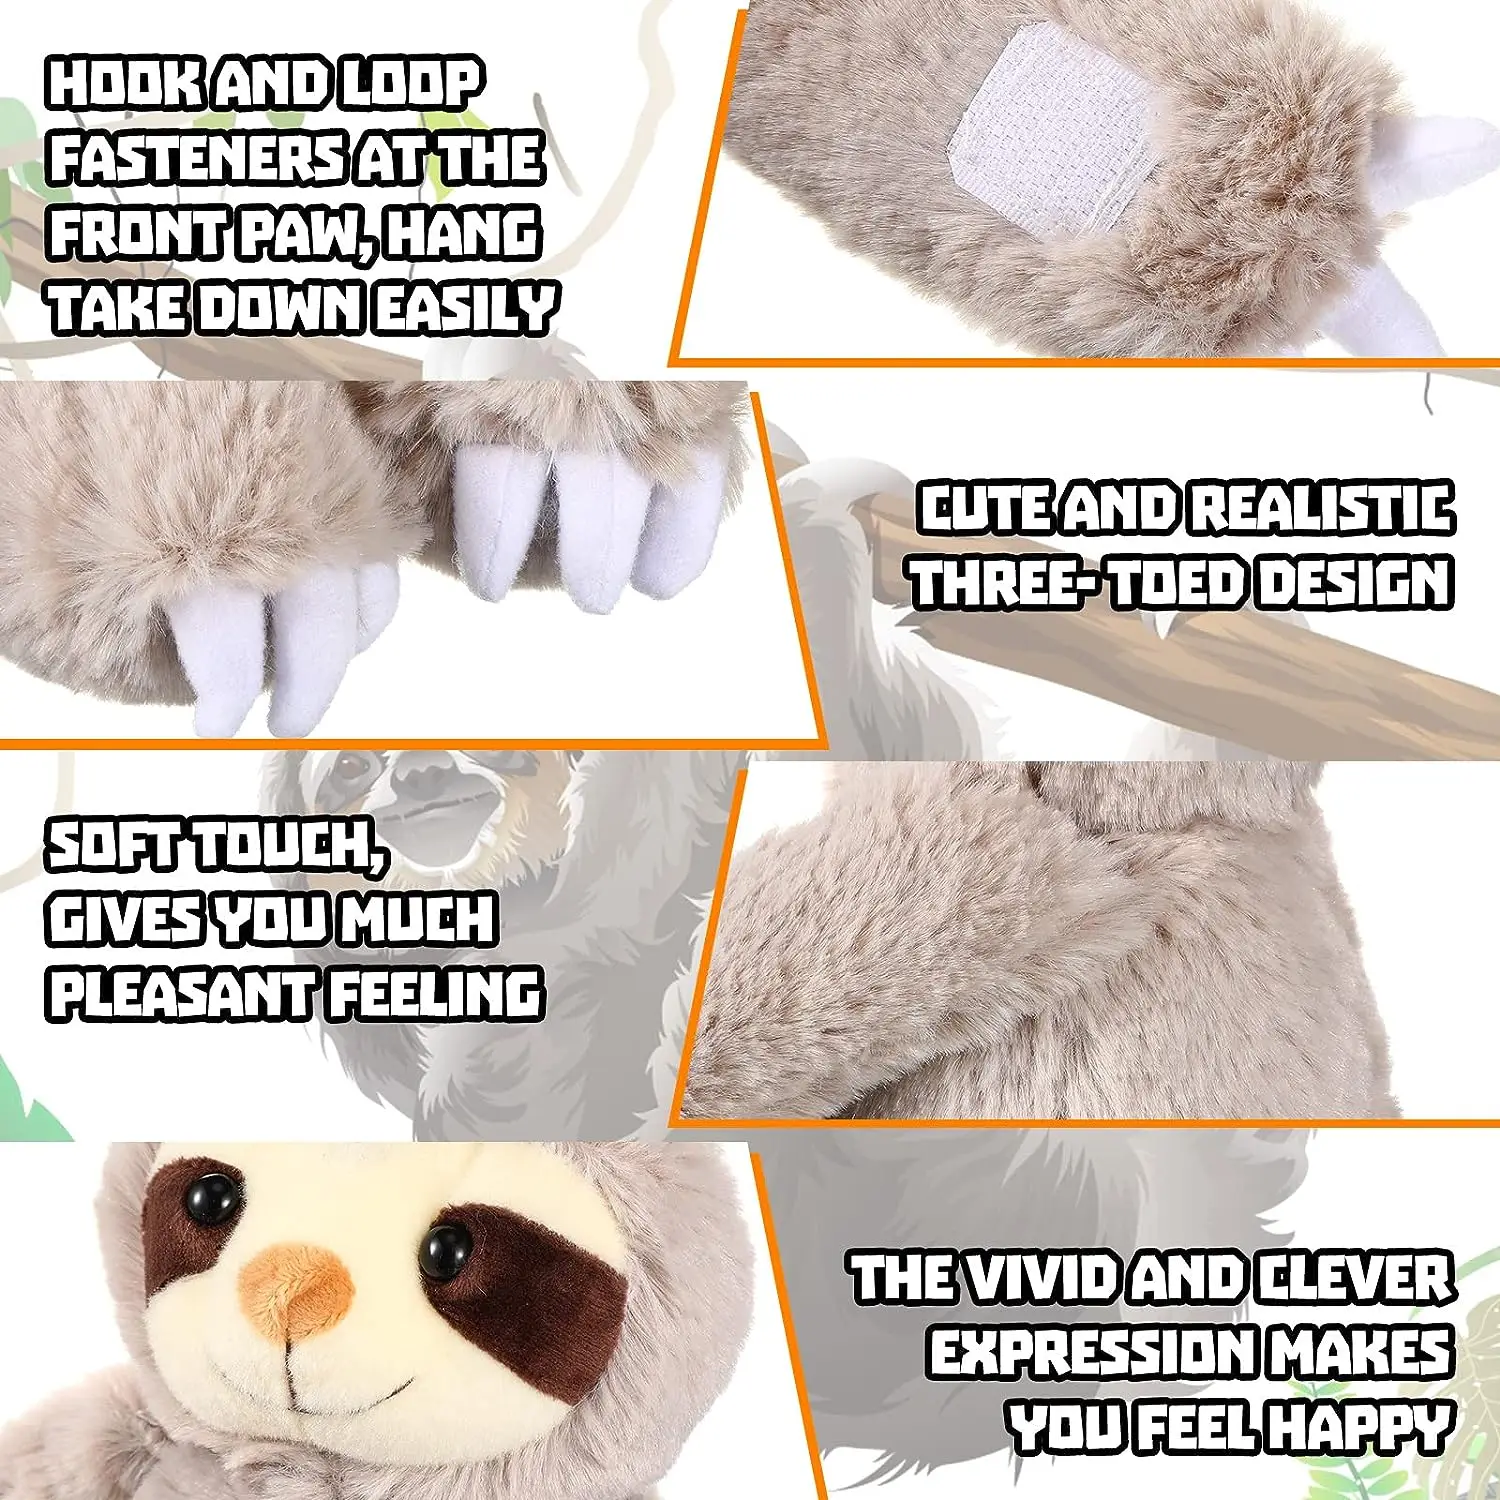 Hanging Sloth Stuffed Animals | 14 Inch Sloth Plush Toy With Hook And Loop Hands -2